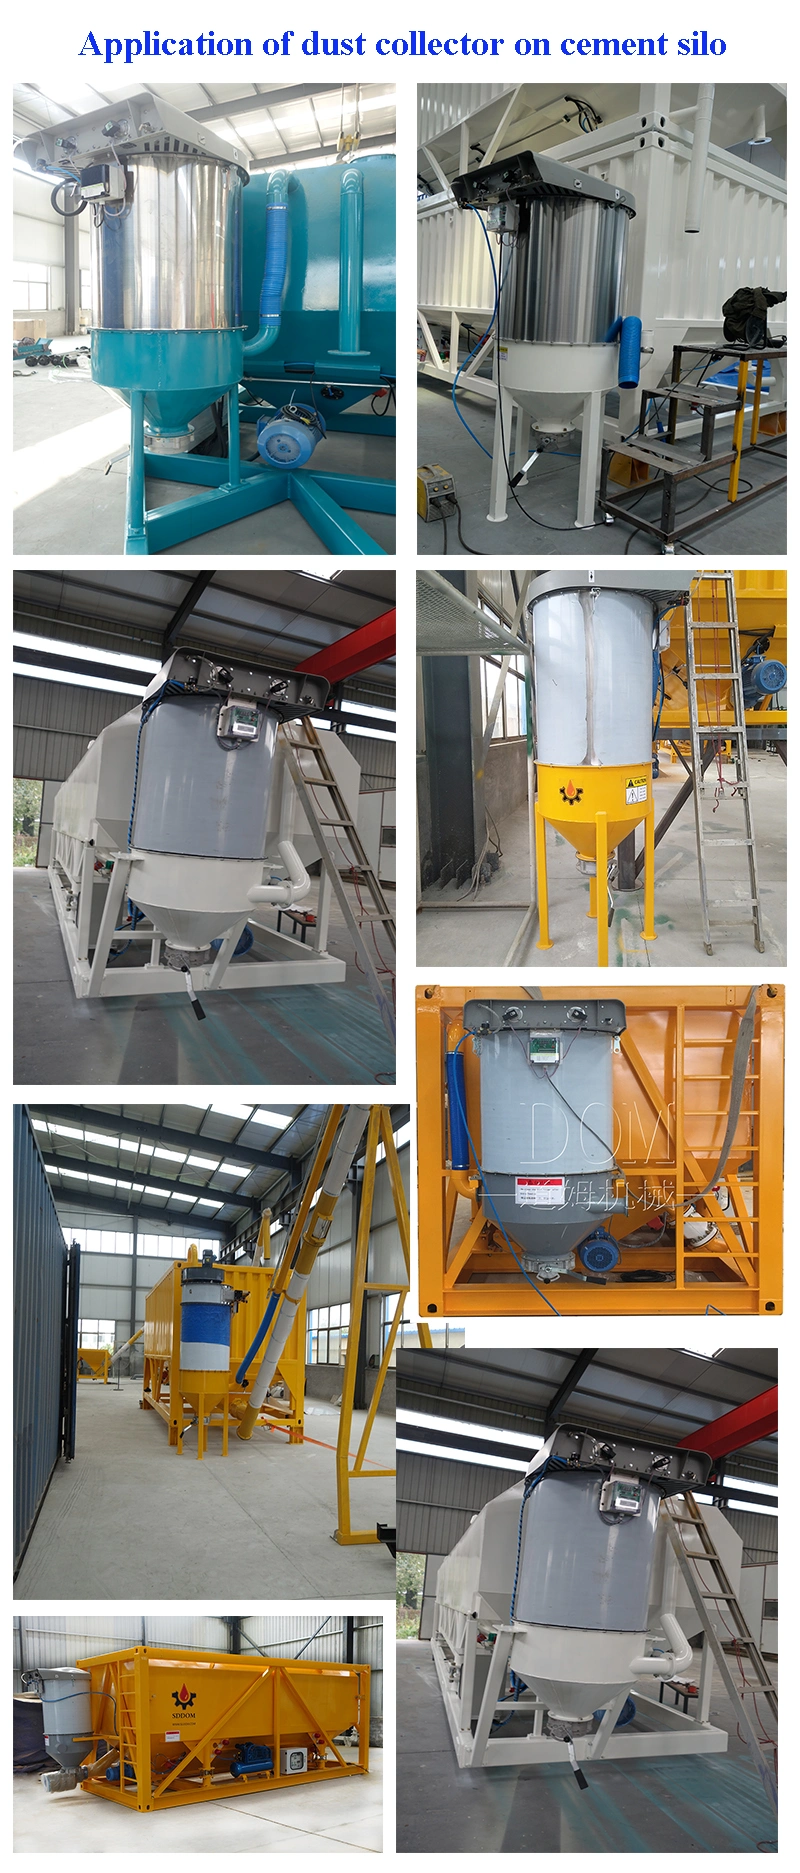 Silo Top Pulse Jet Dust Collectors Dust Collector Hopper Dust Collector for Cement Silo